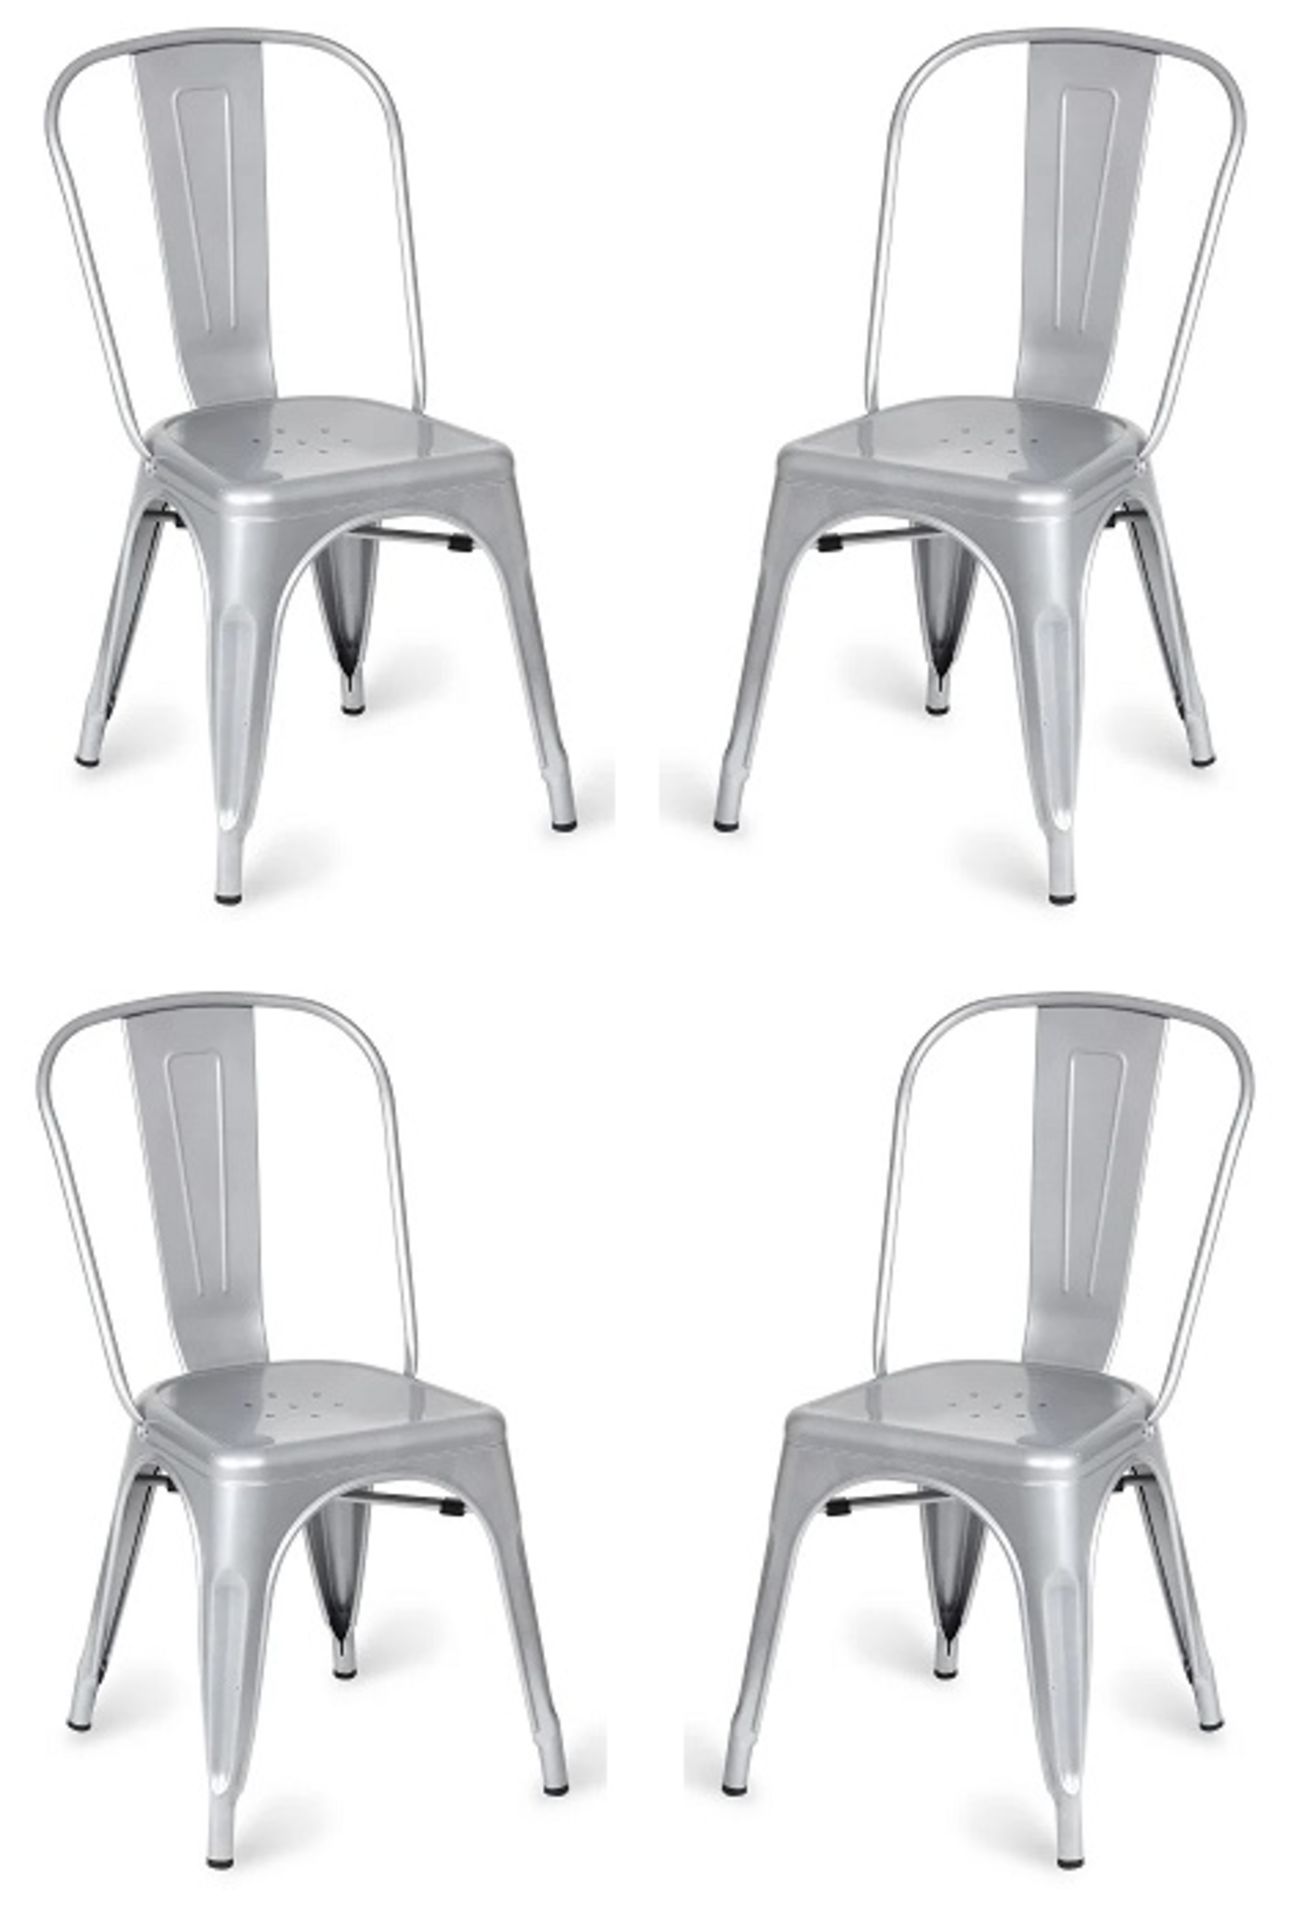 4 x Industrial Tolix Style Stackable Chairs - Finish: SILVER - Ideal For Bistros, Pub Gardens, - Image 3 of 5